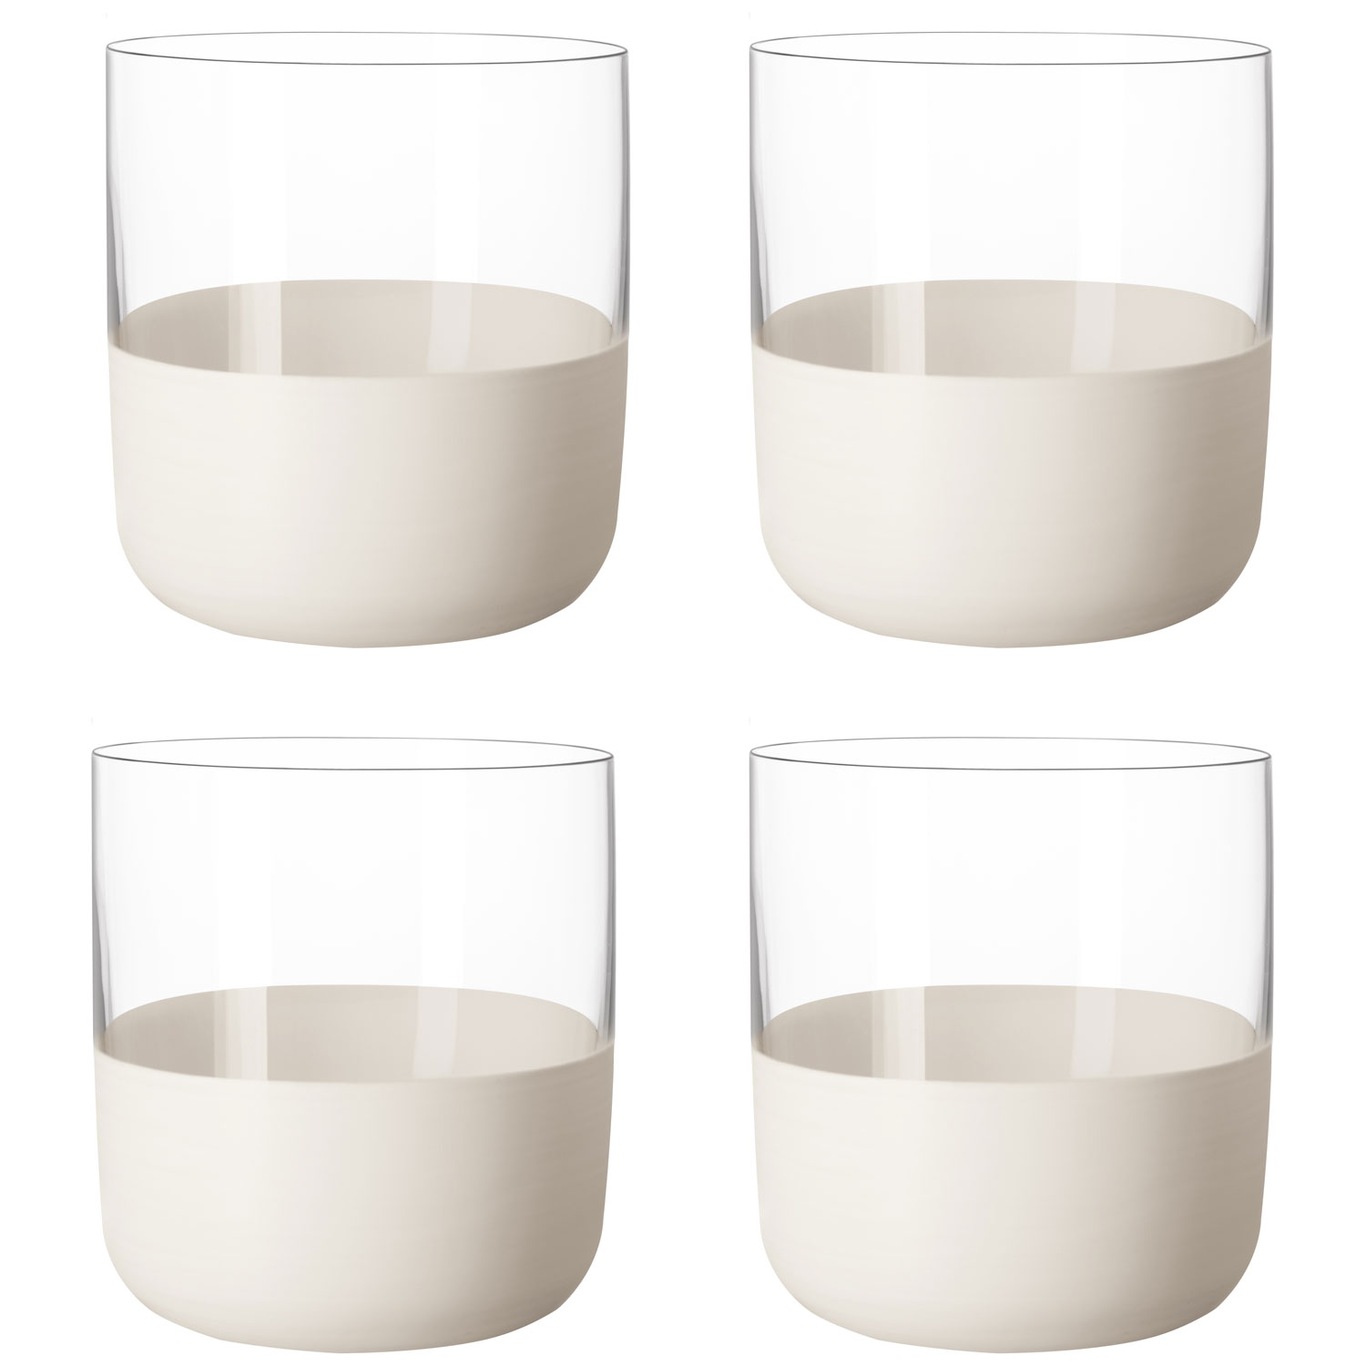 Manufacture Rock Shot Glasses 4 cl 4-pack, White